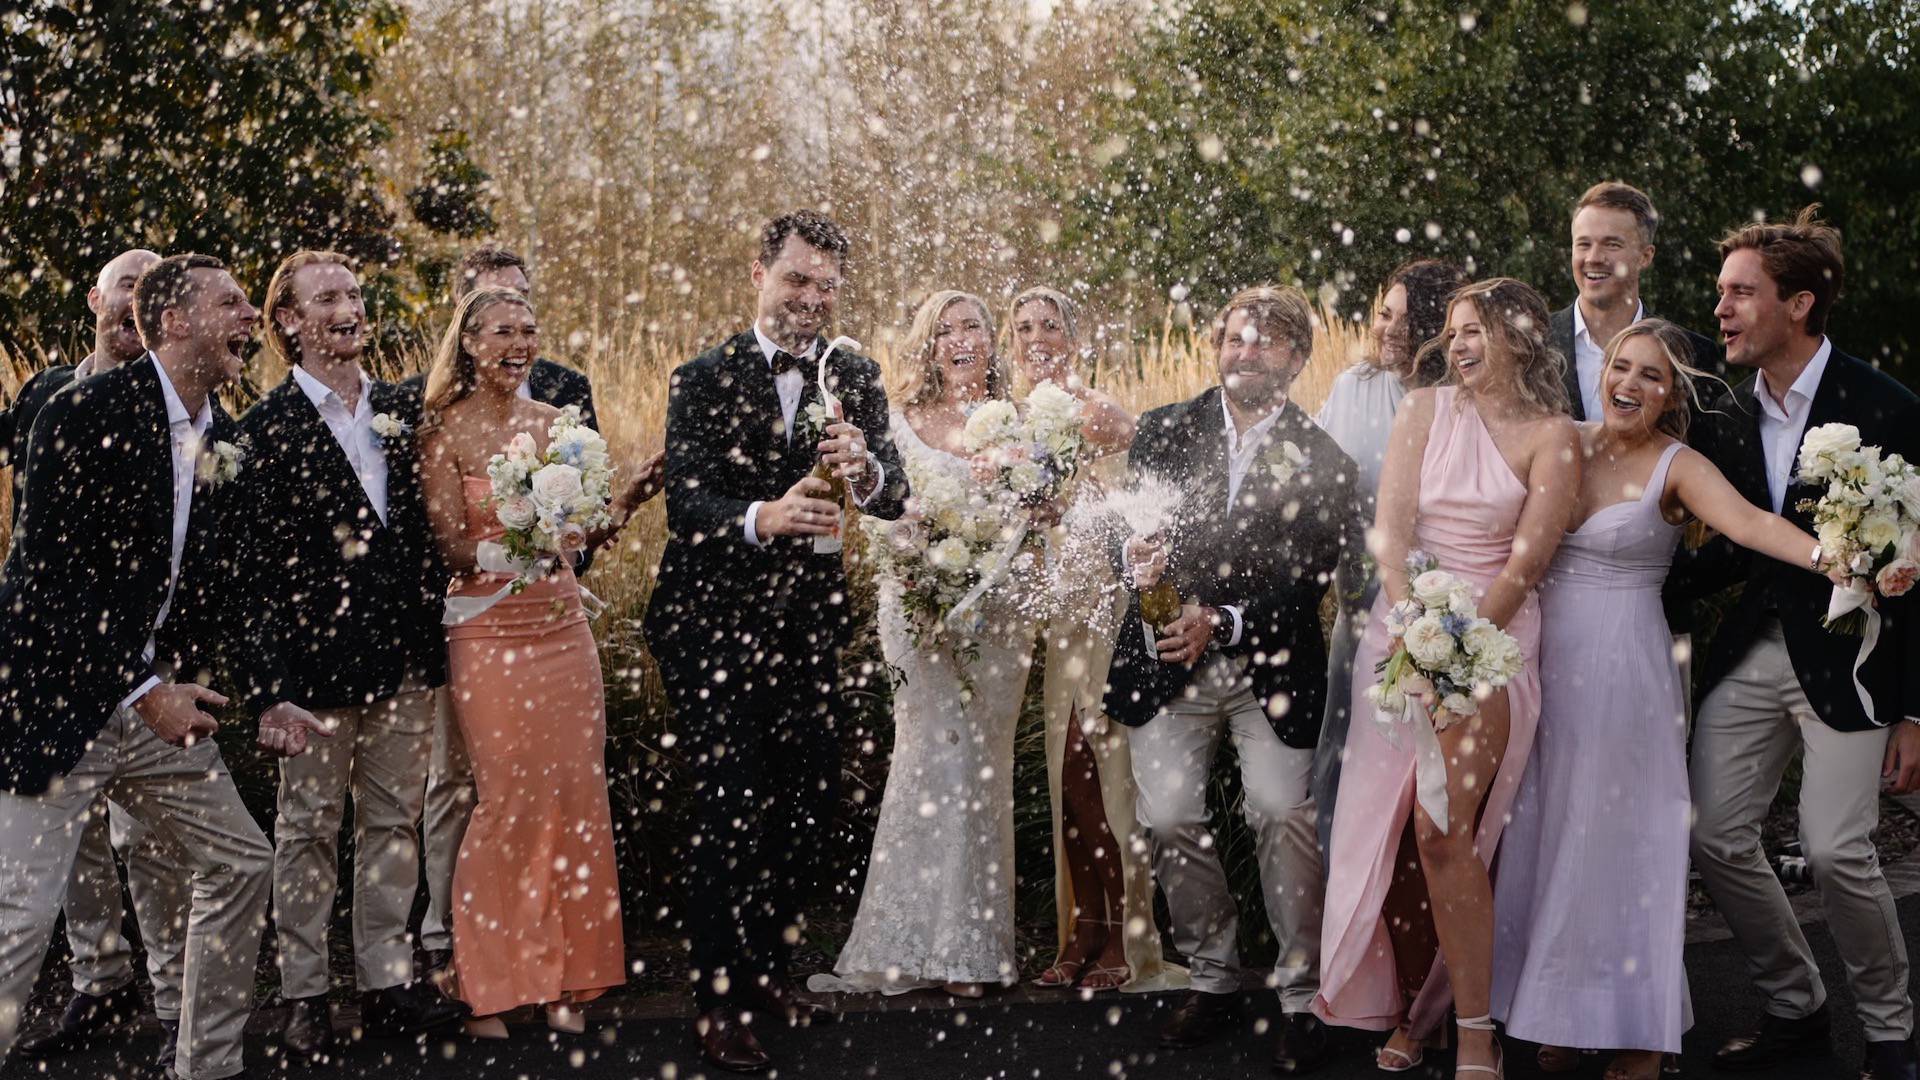 Bridal party celebrating by popping champagne bottles - photographer and wedding videographer Kangaroo Valley - Lovereel